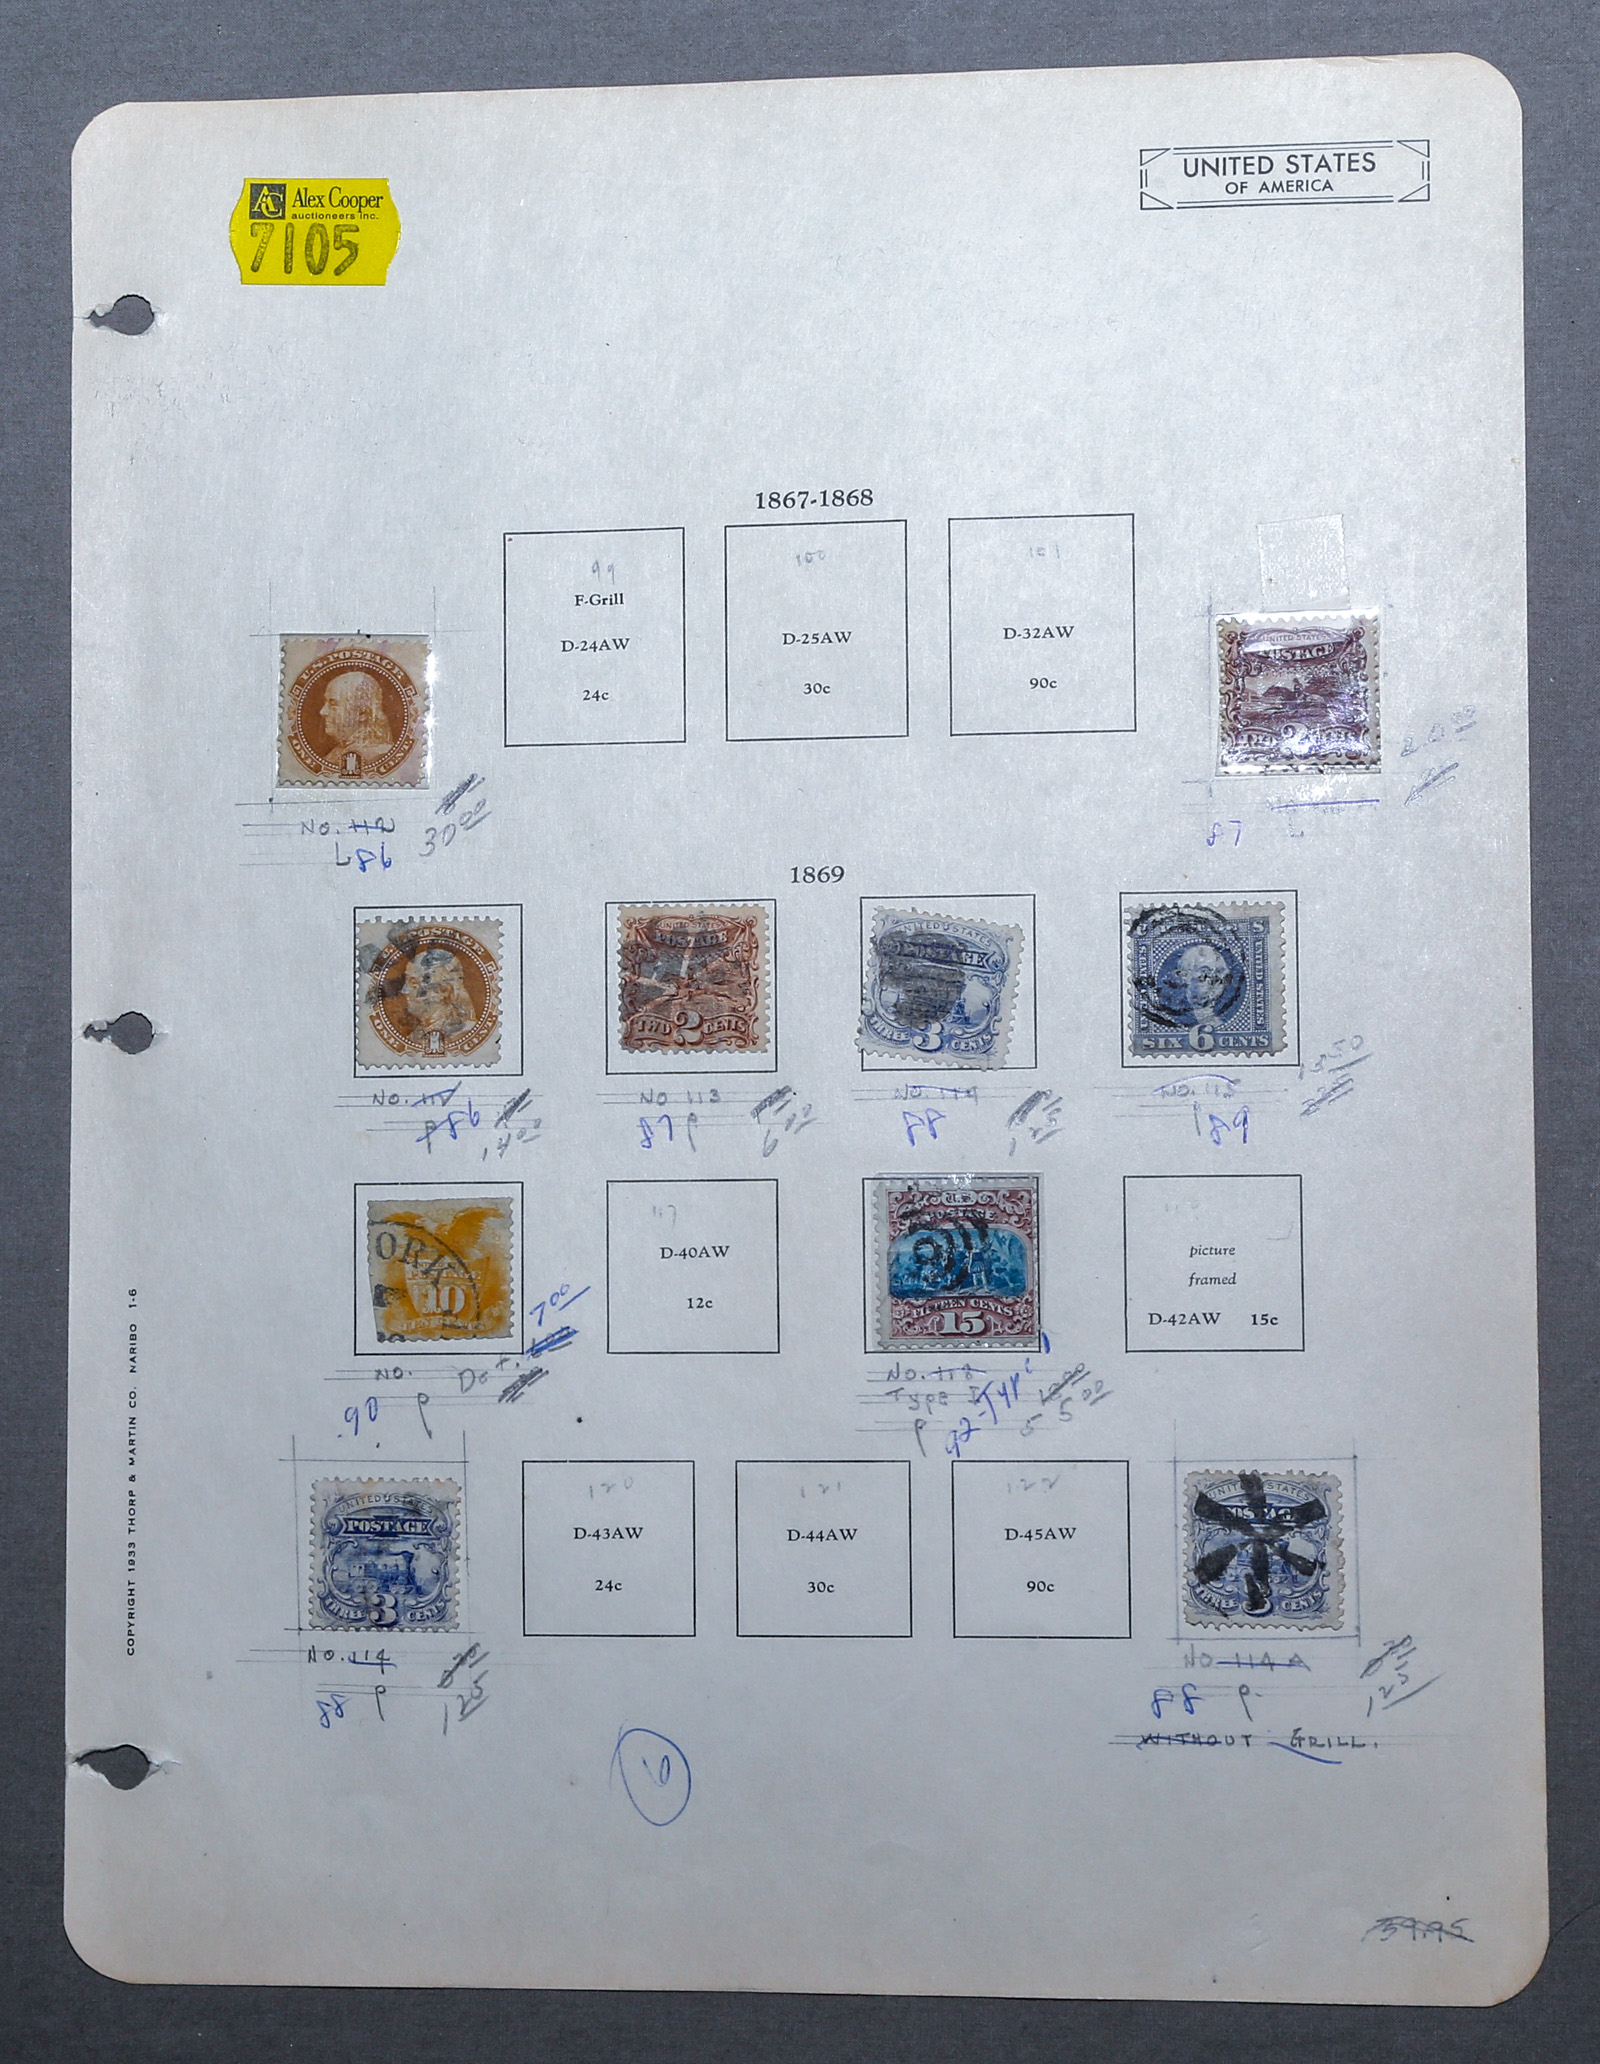 CLASSIC U S POSTAGE STAMPS ISSUE 3b2a78